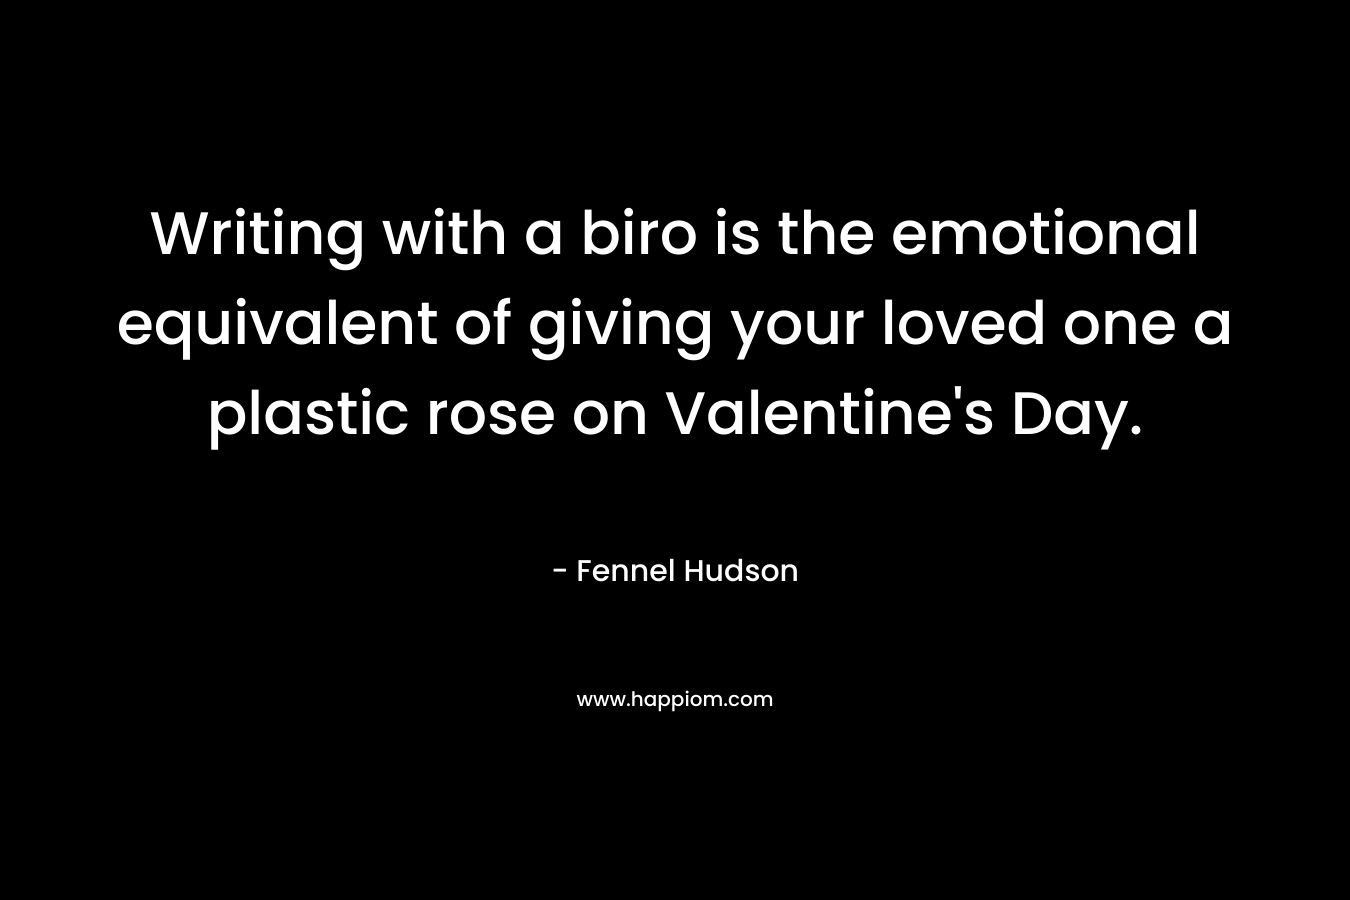 Writing with a biro is the emotional equivalent of giving your loved one a plastic rose on Valentine’s Day. – Fennel Hudson